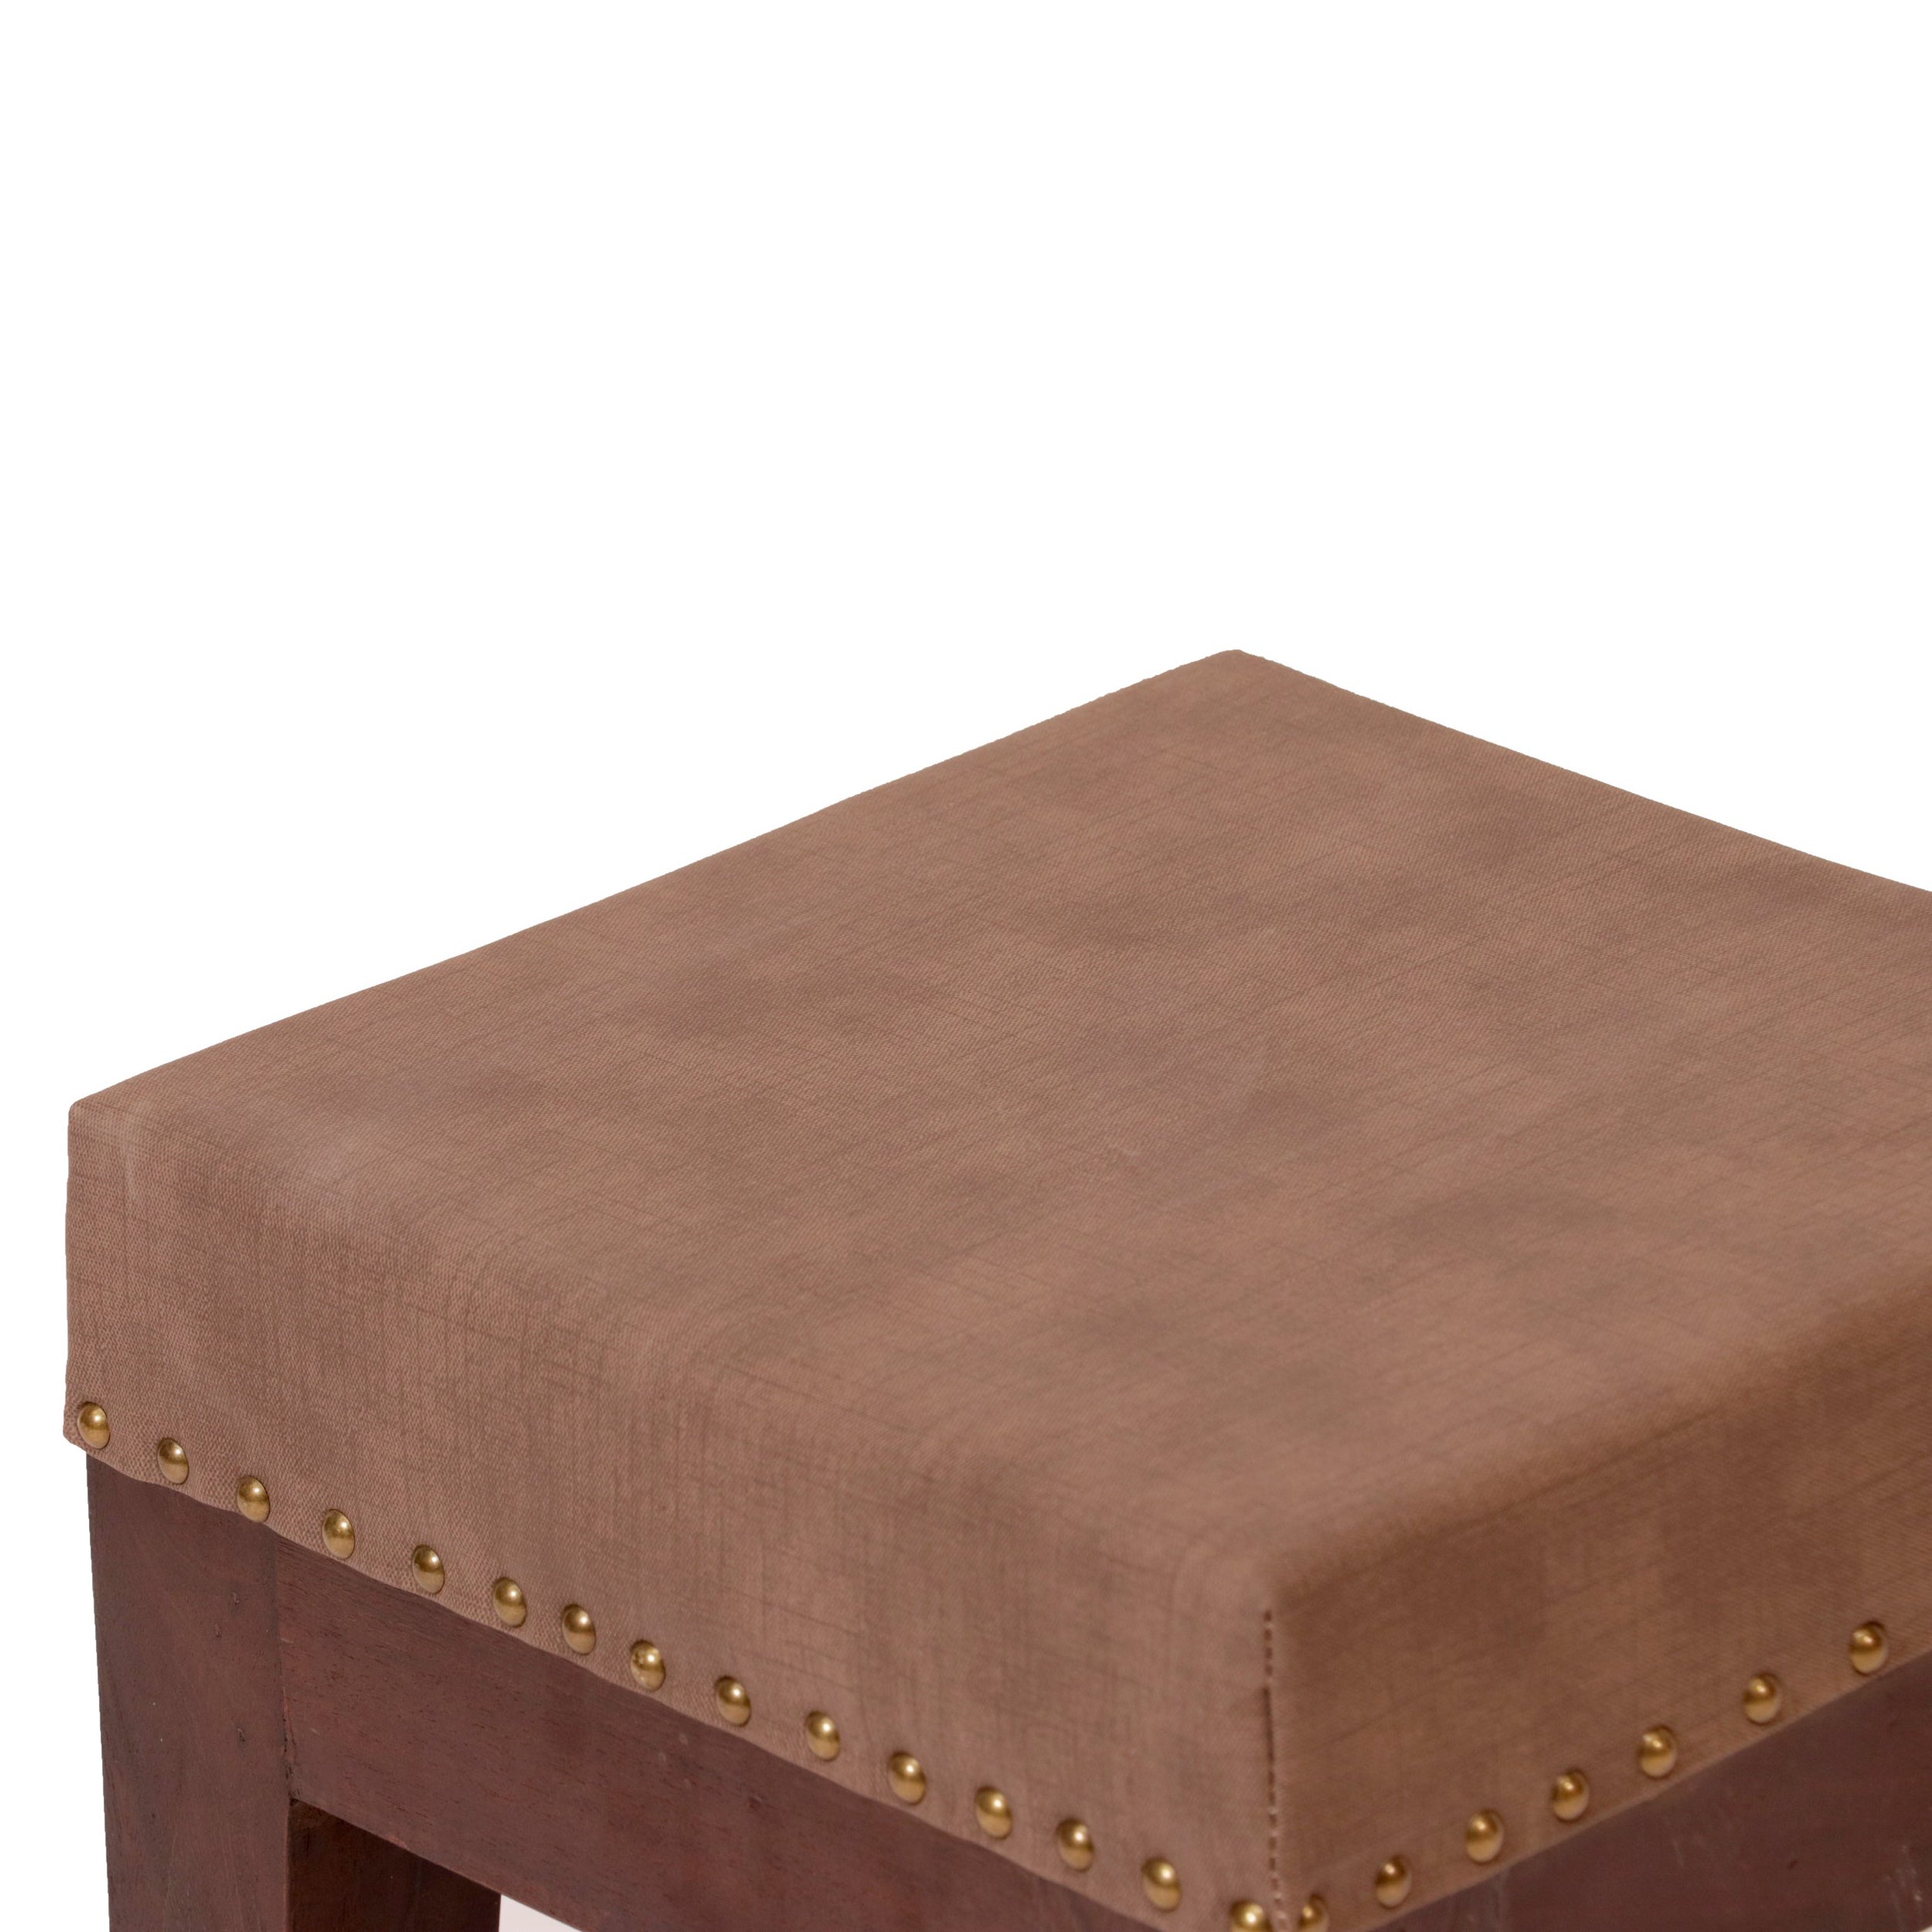 Upholstered Contemporary Stool Stool